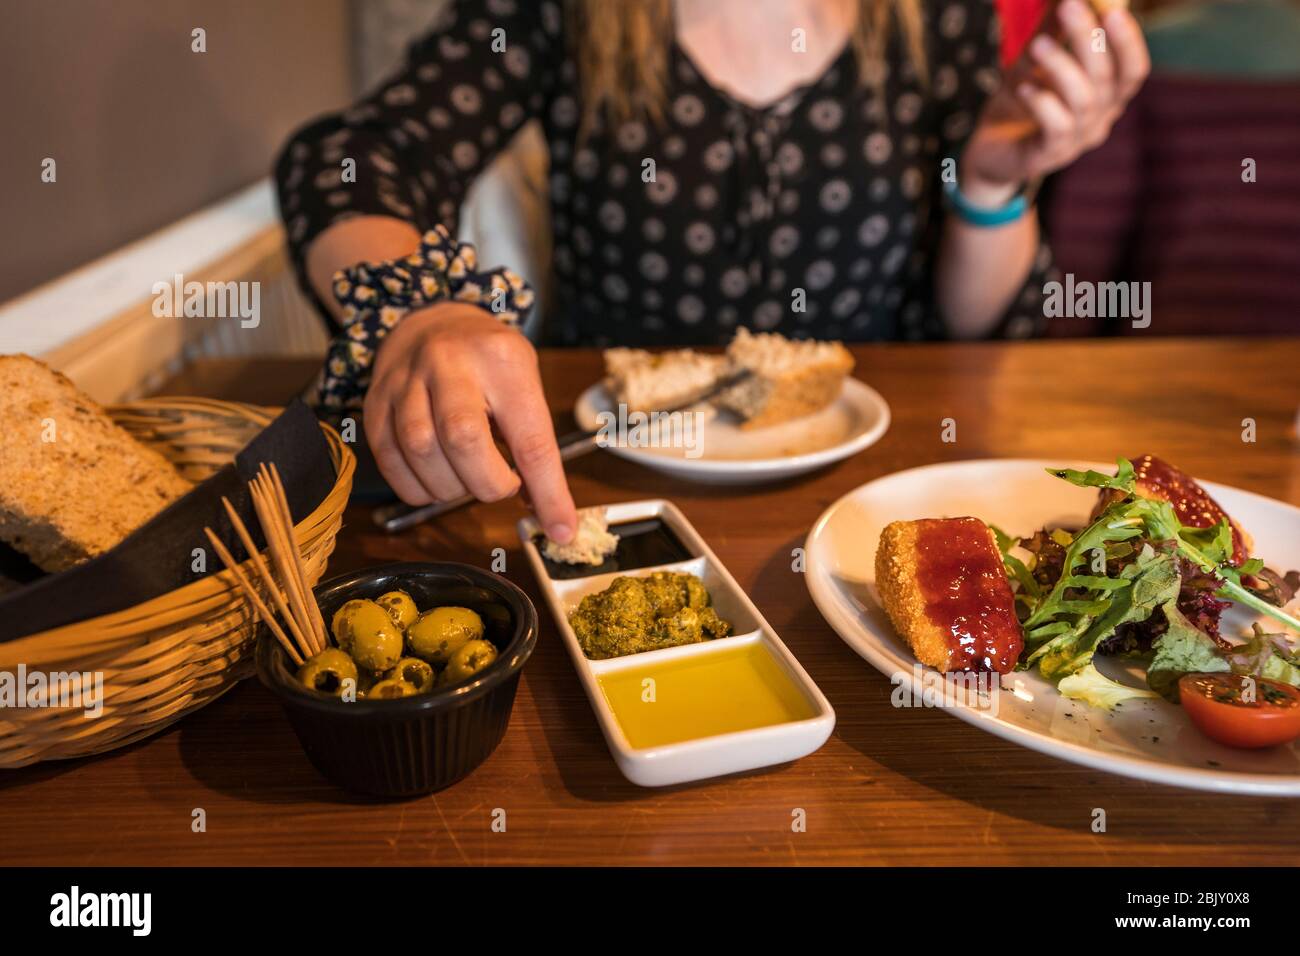 Female person dips bread in sauce while eating appetizers of baked brie and olives, balsamic vinegar, olive oil and pesto with bread, Falkland, Fife, Stock Photo